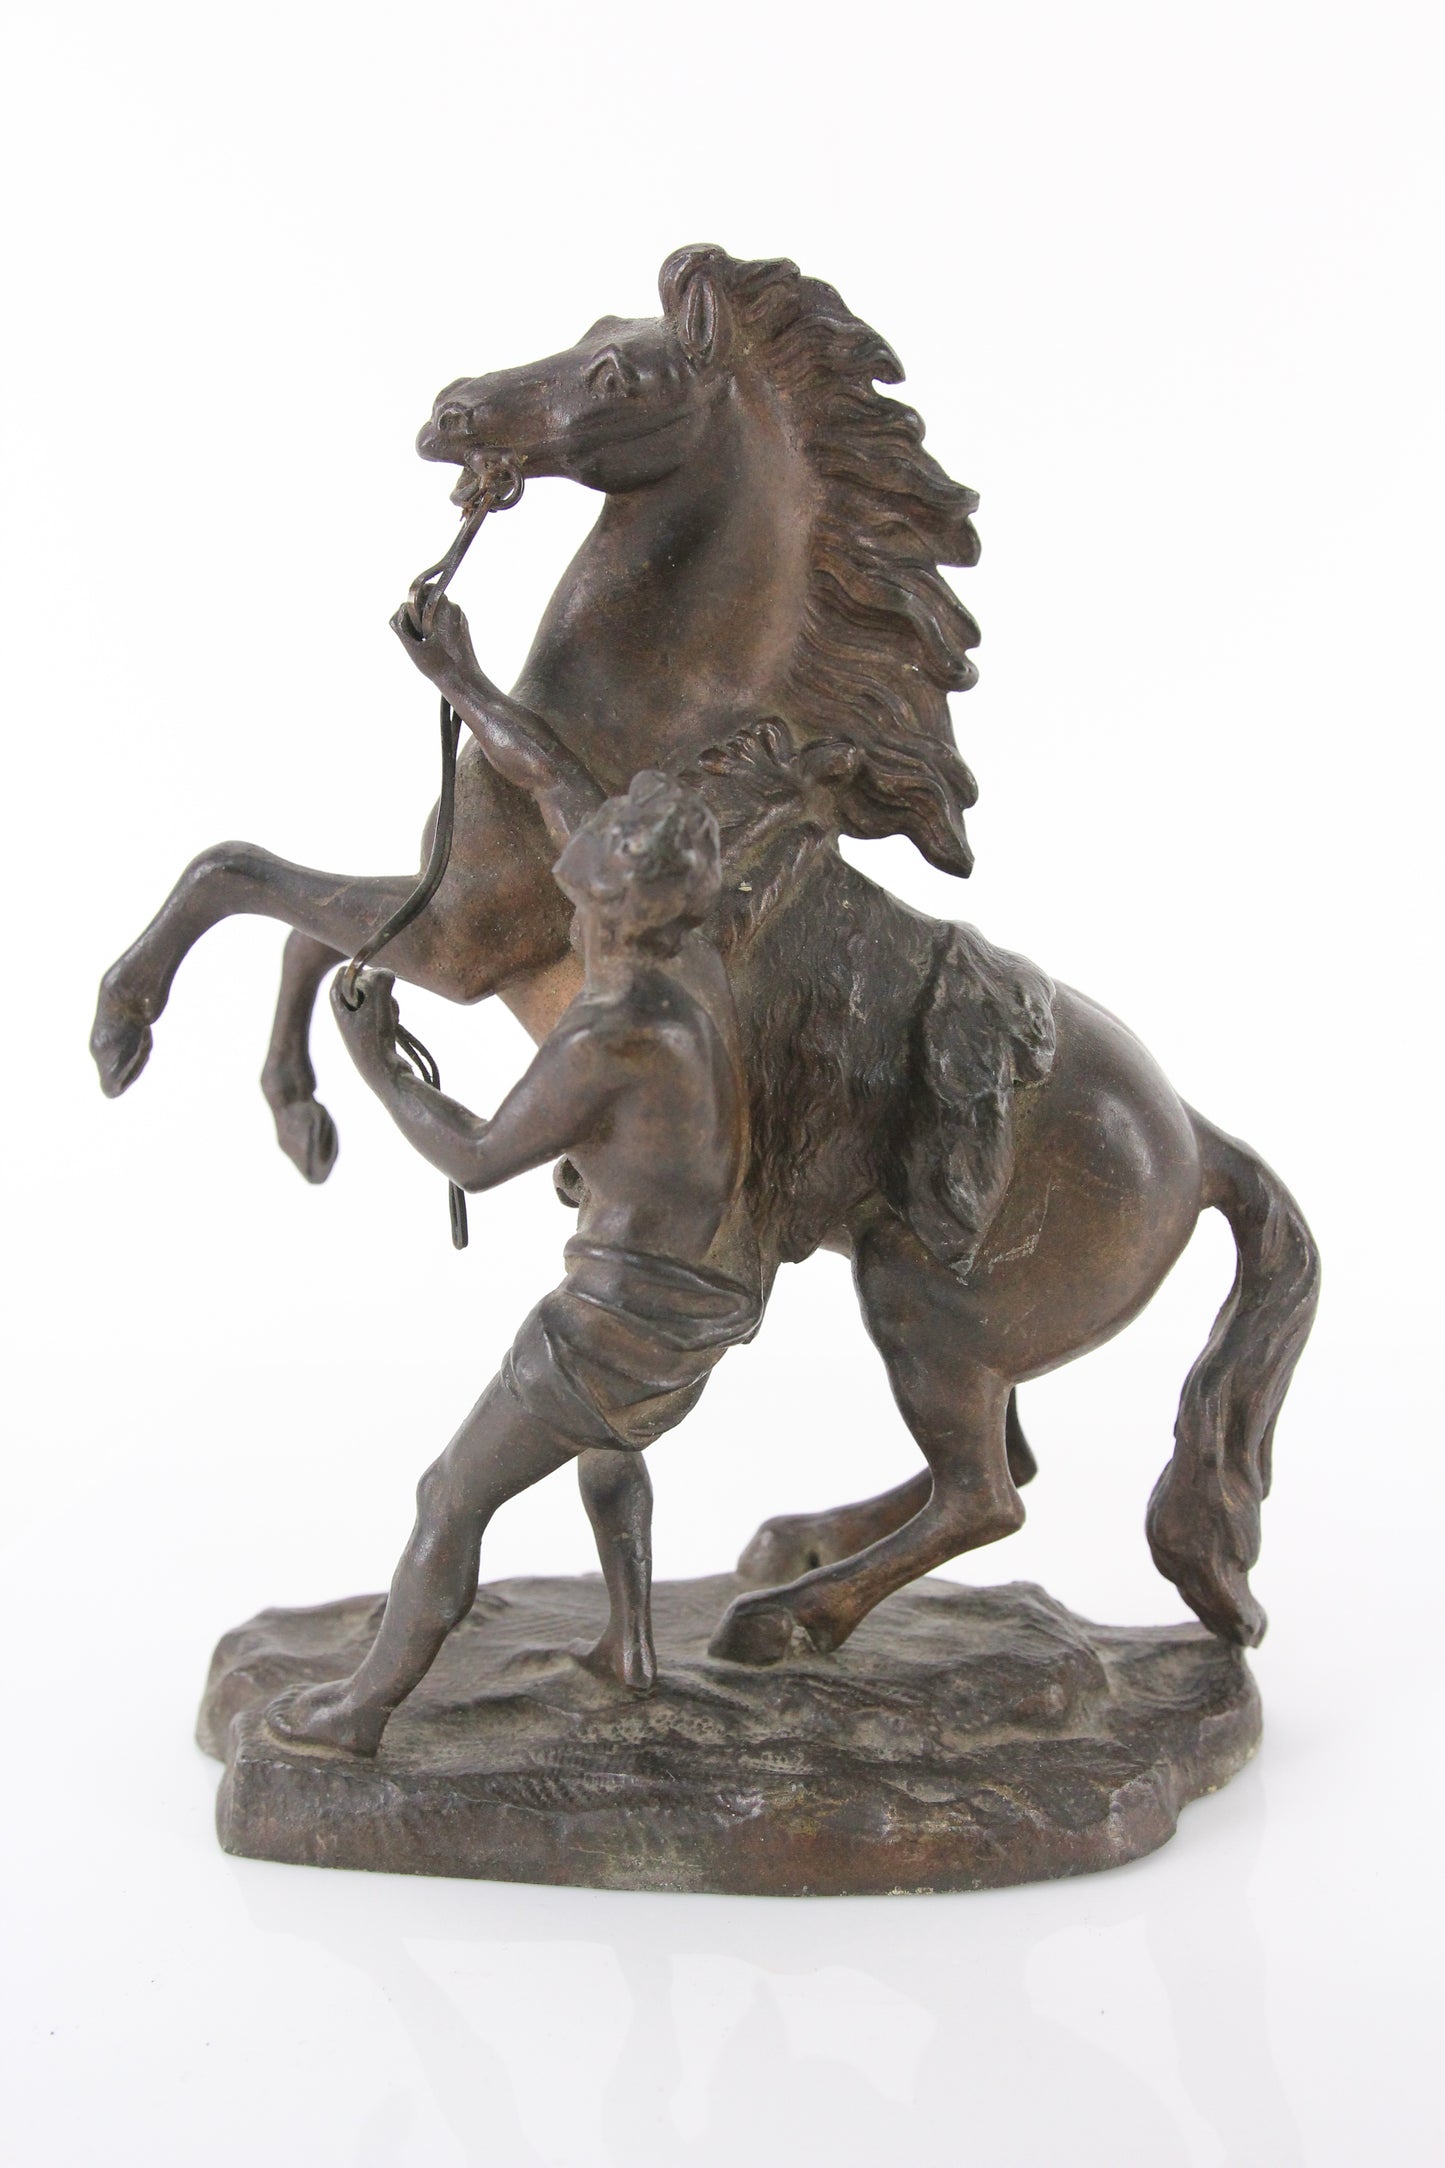 Antique Bronzed Metal Clock Topper Statue of Bucking Horse and Native Man